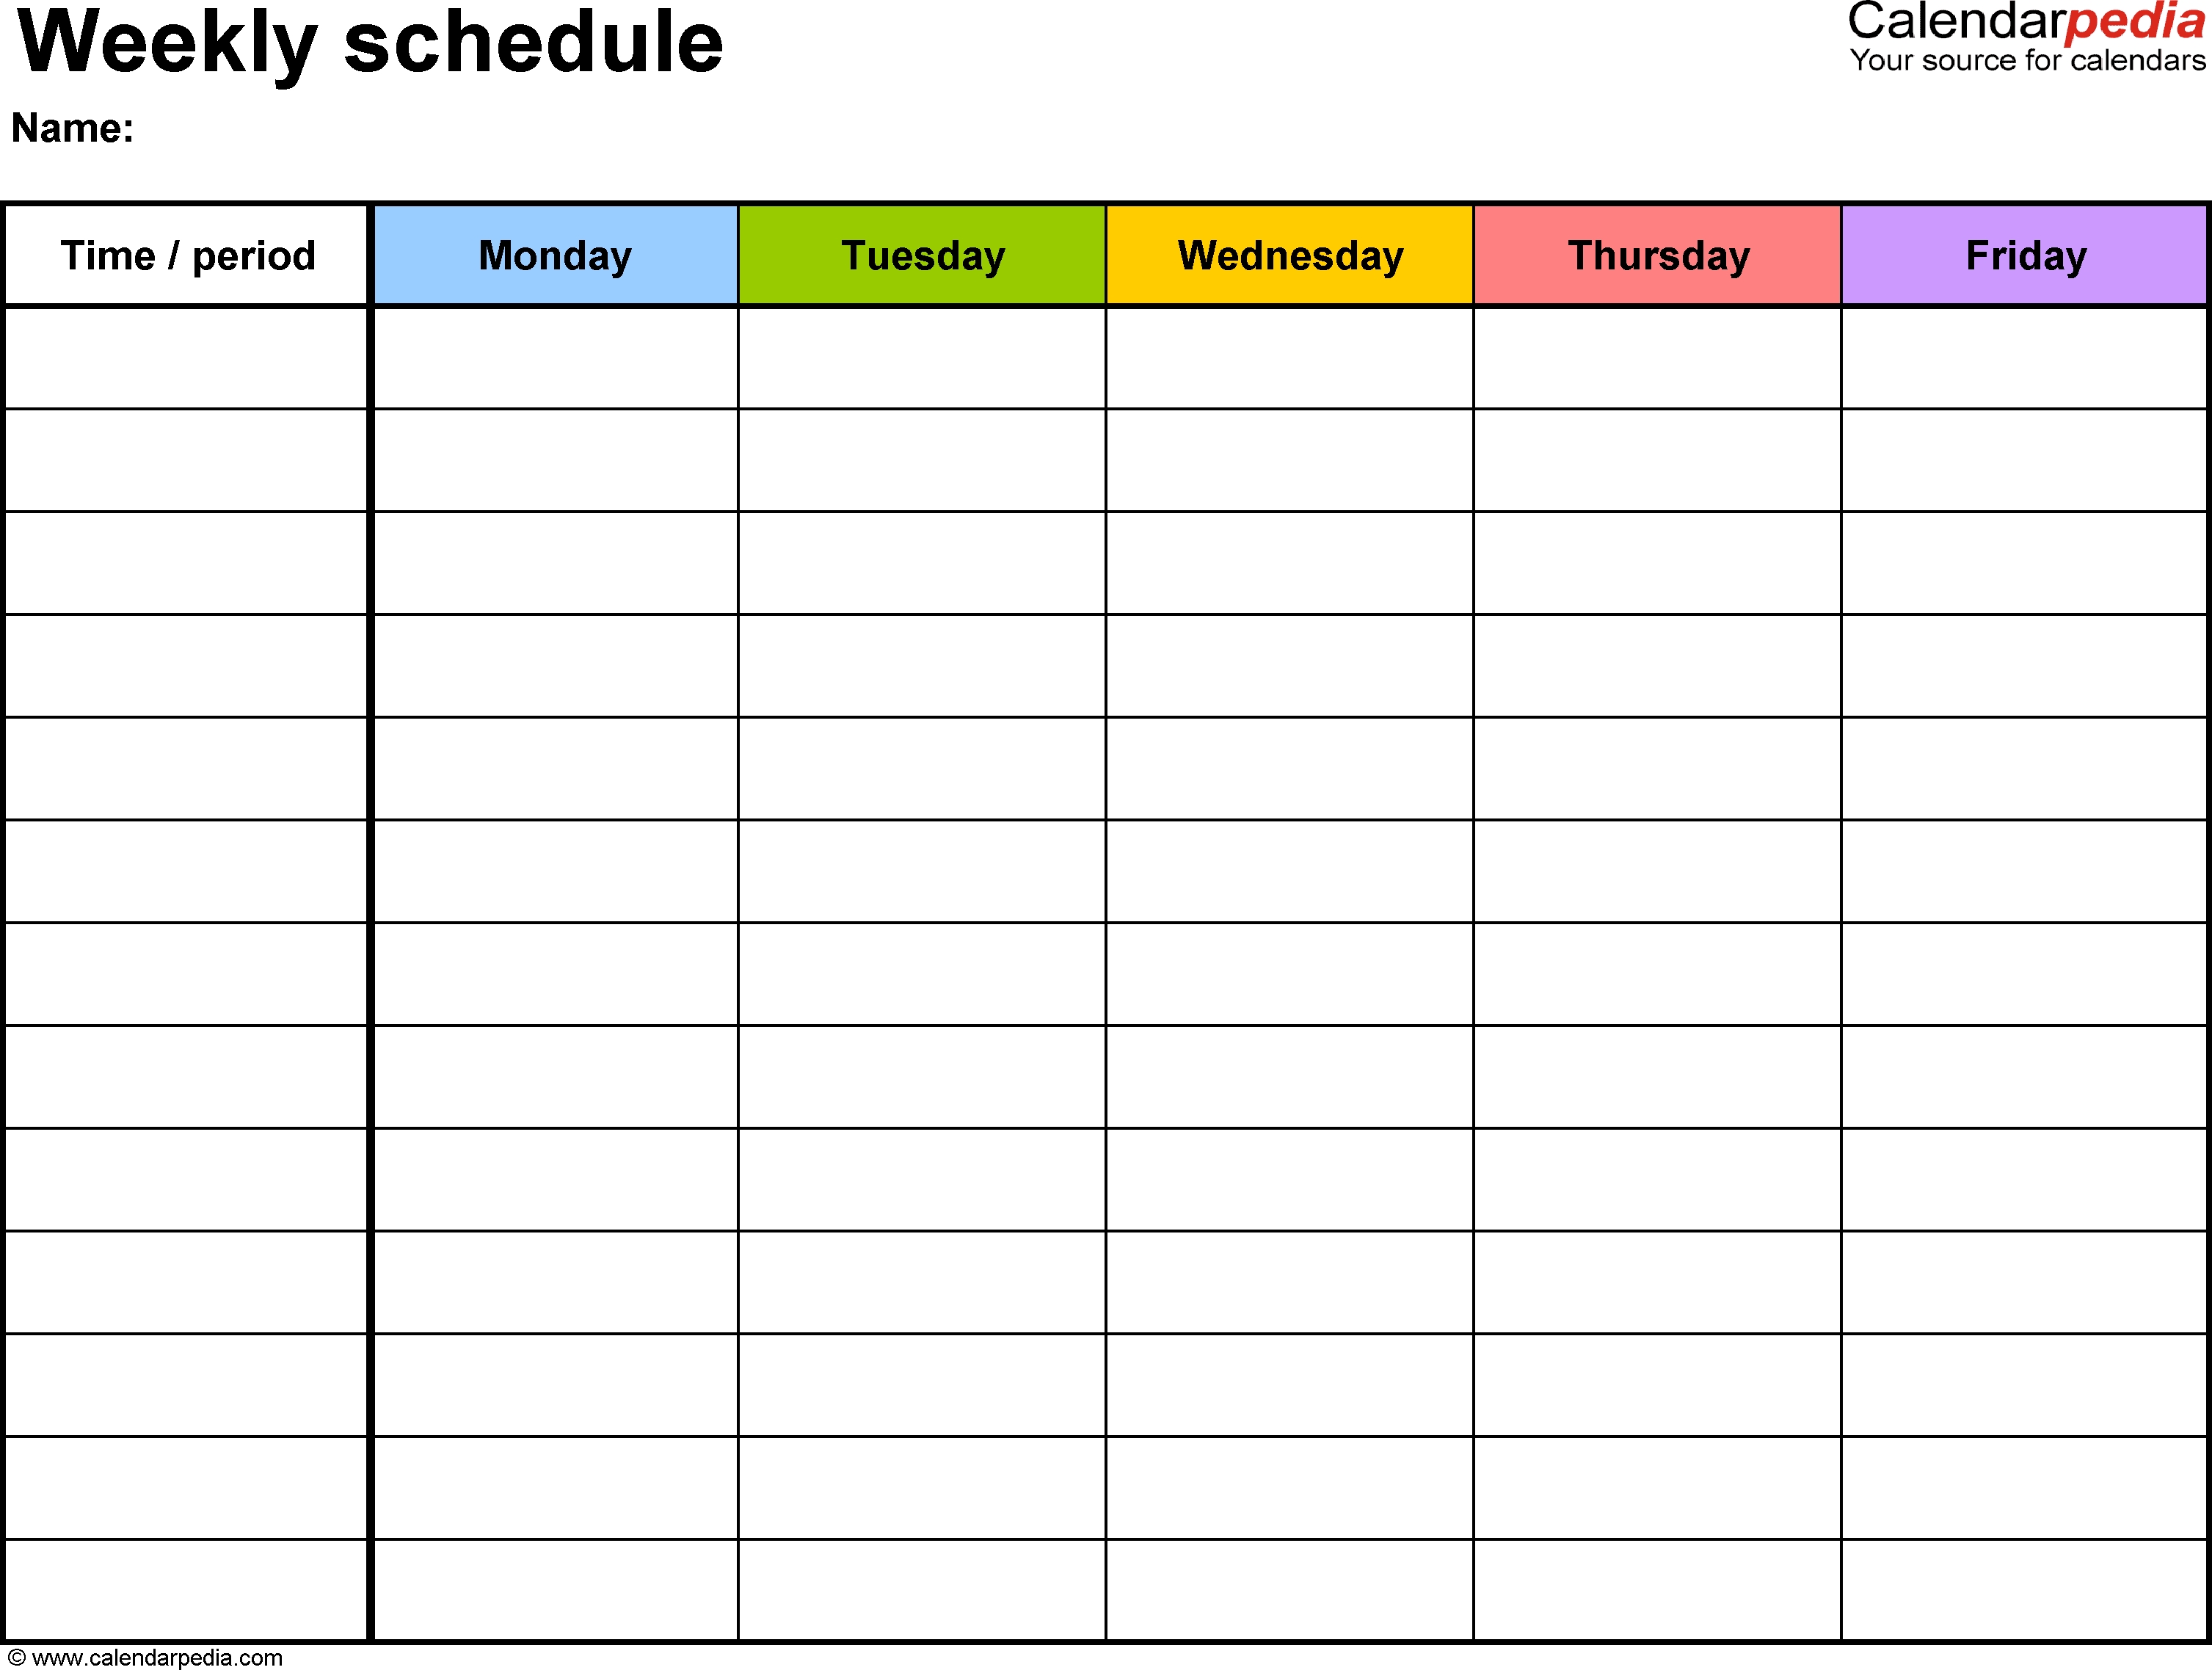 Free Weekly Schedule Templates For Word - 18 Templates pertaining to 7 Day Blank Calendar Template